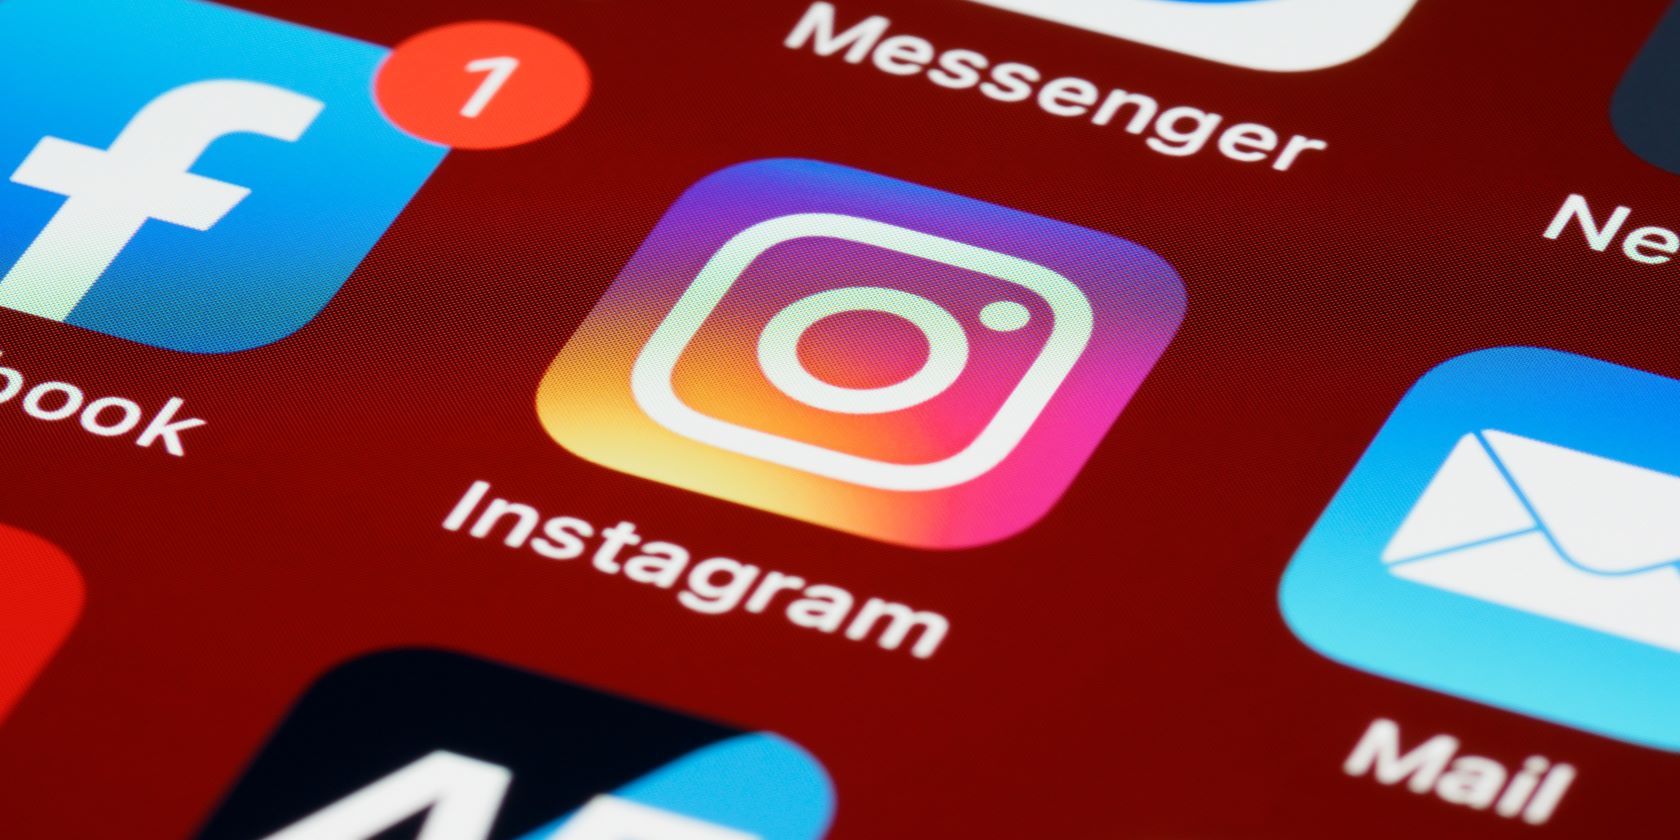 A grid of mobile app icons showing Instagram most prominently